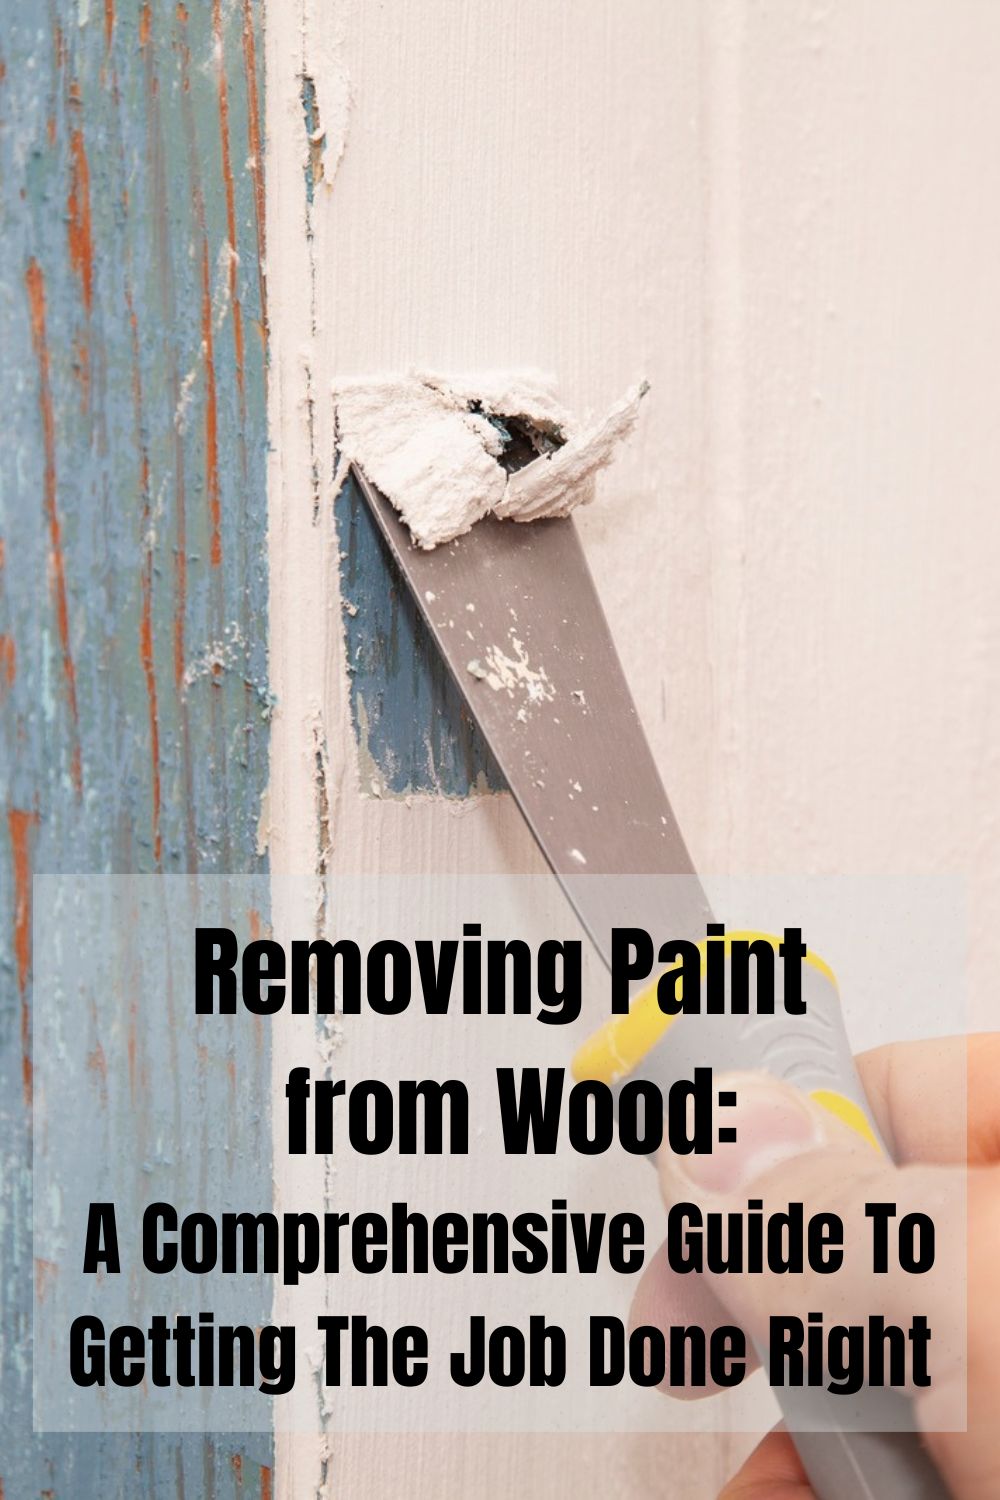 Removing Paint from Wood1